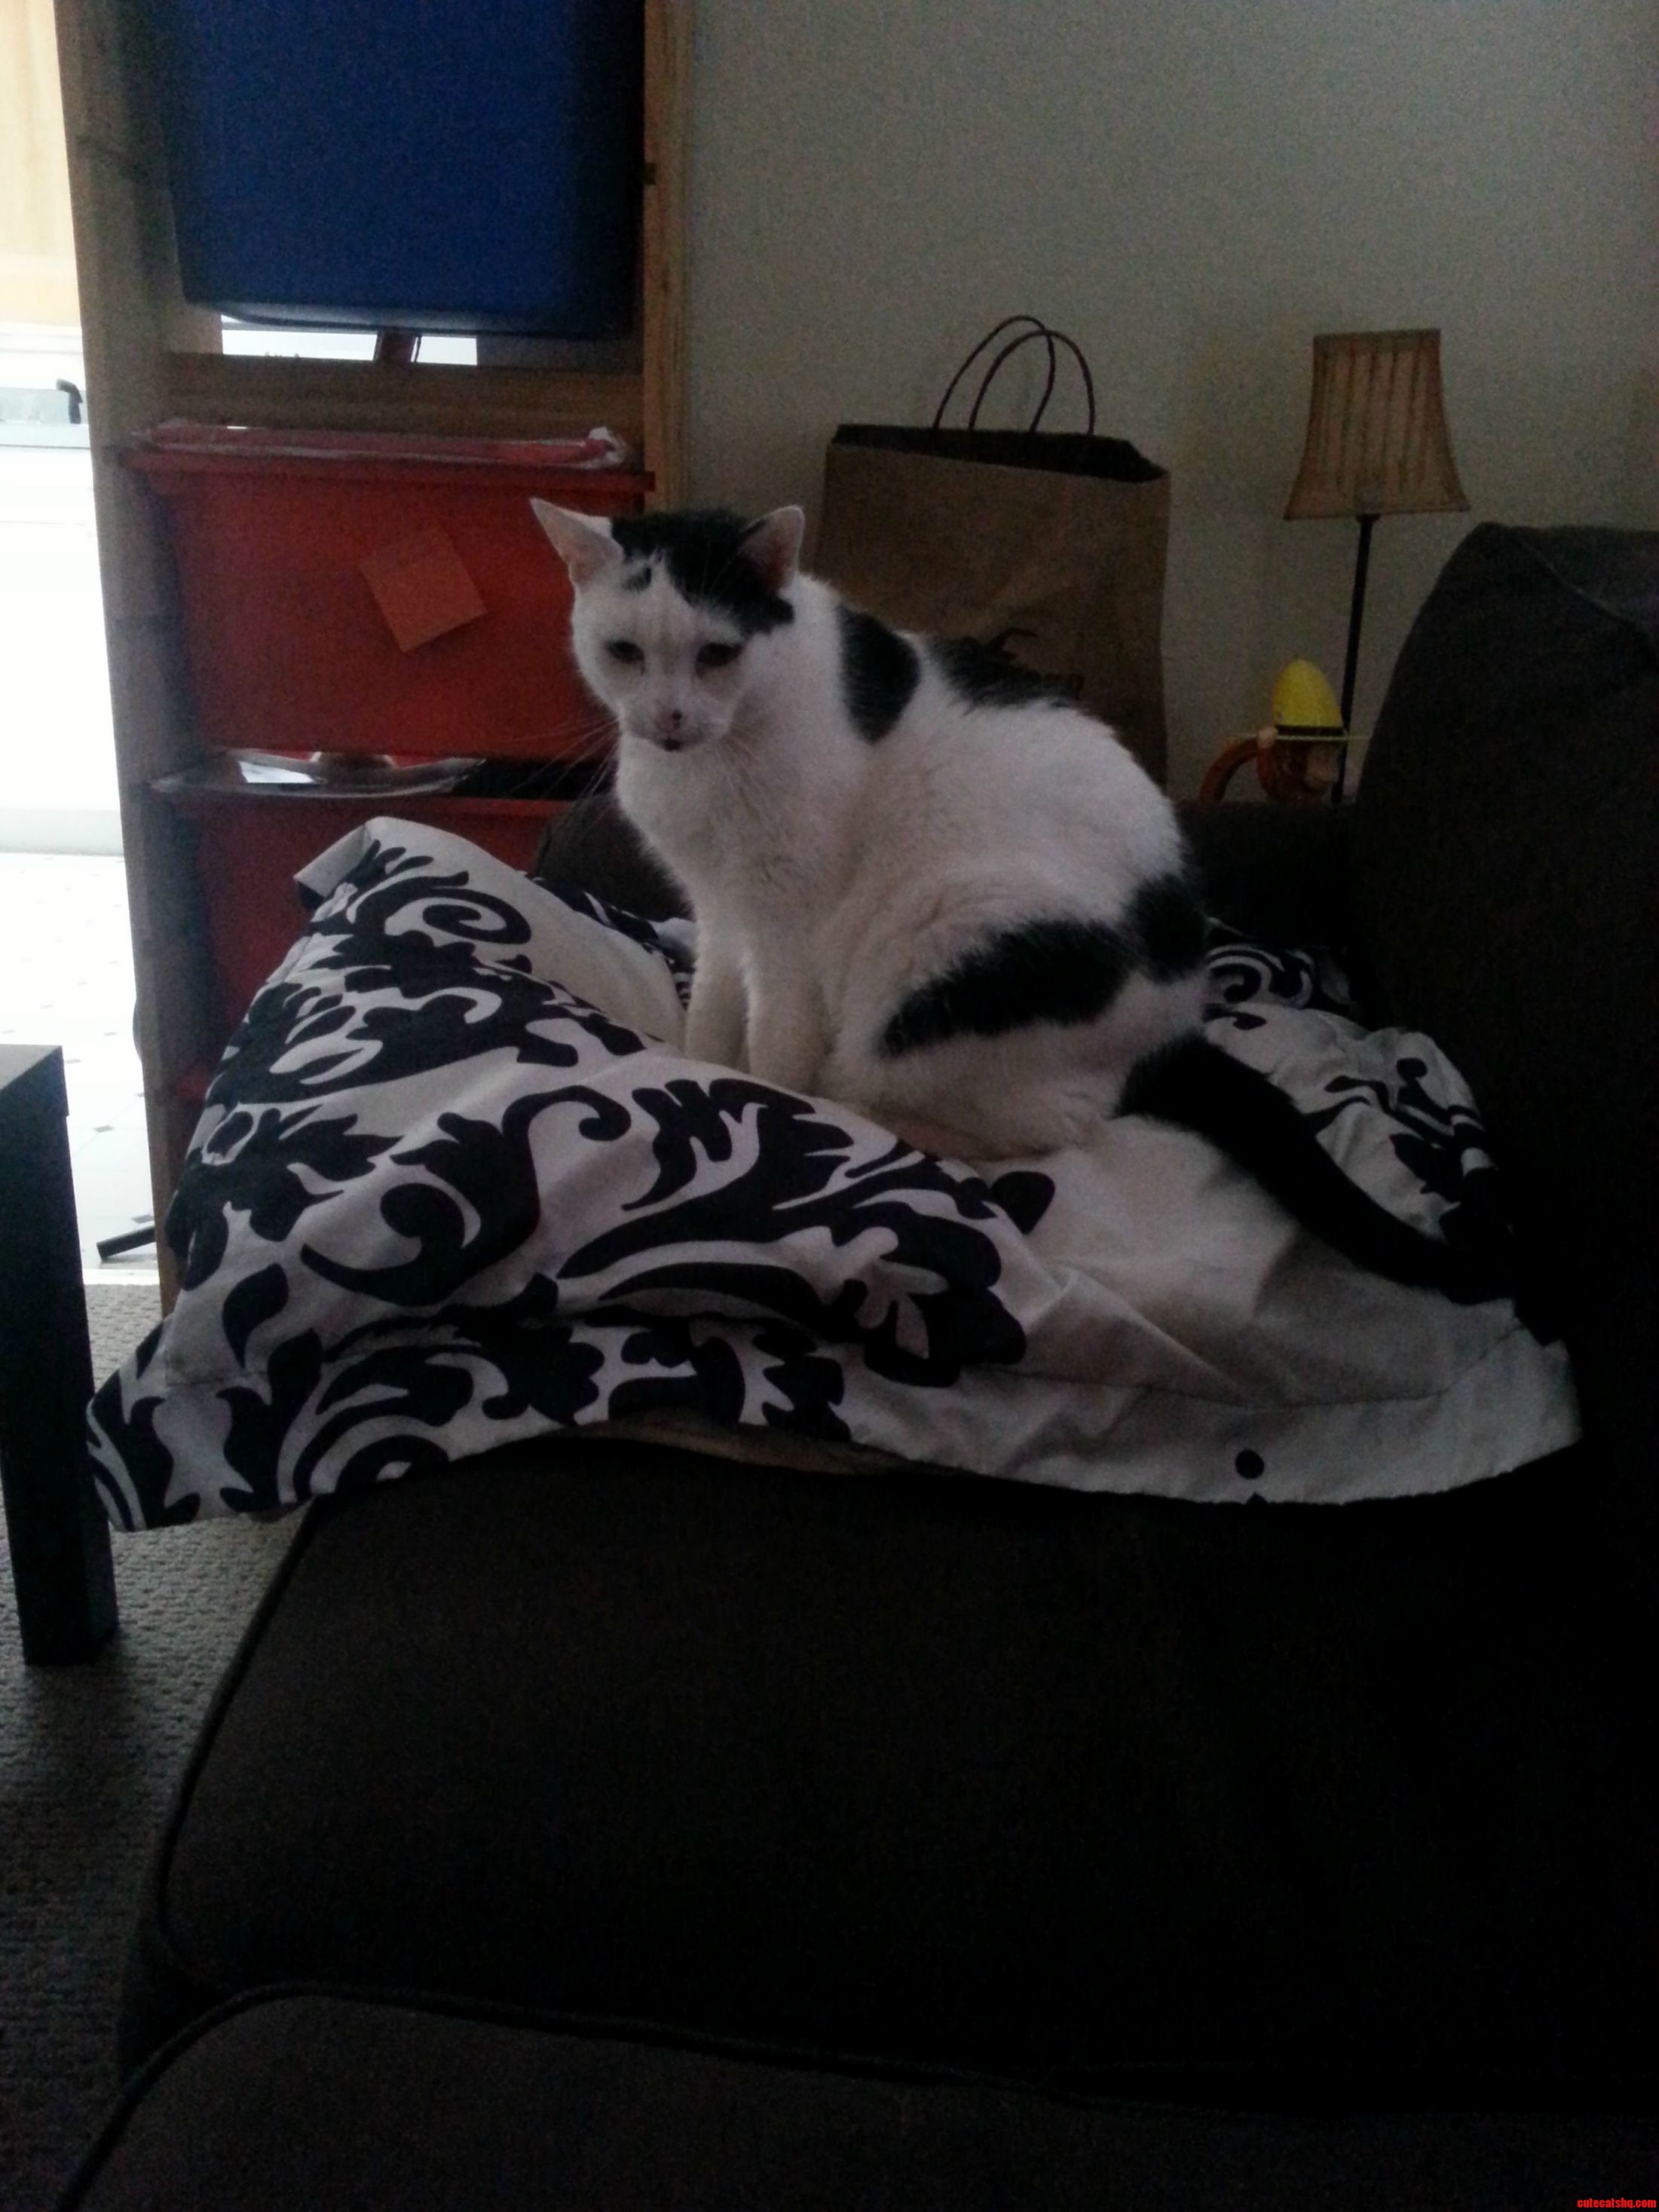 Oh Good Hes Made A Throne Out Of My Pillow.